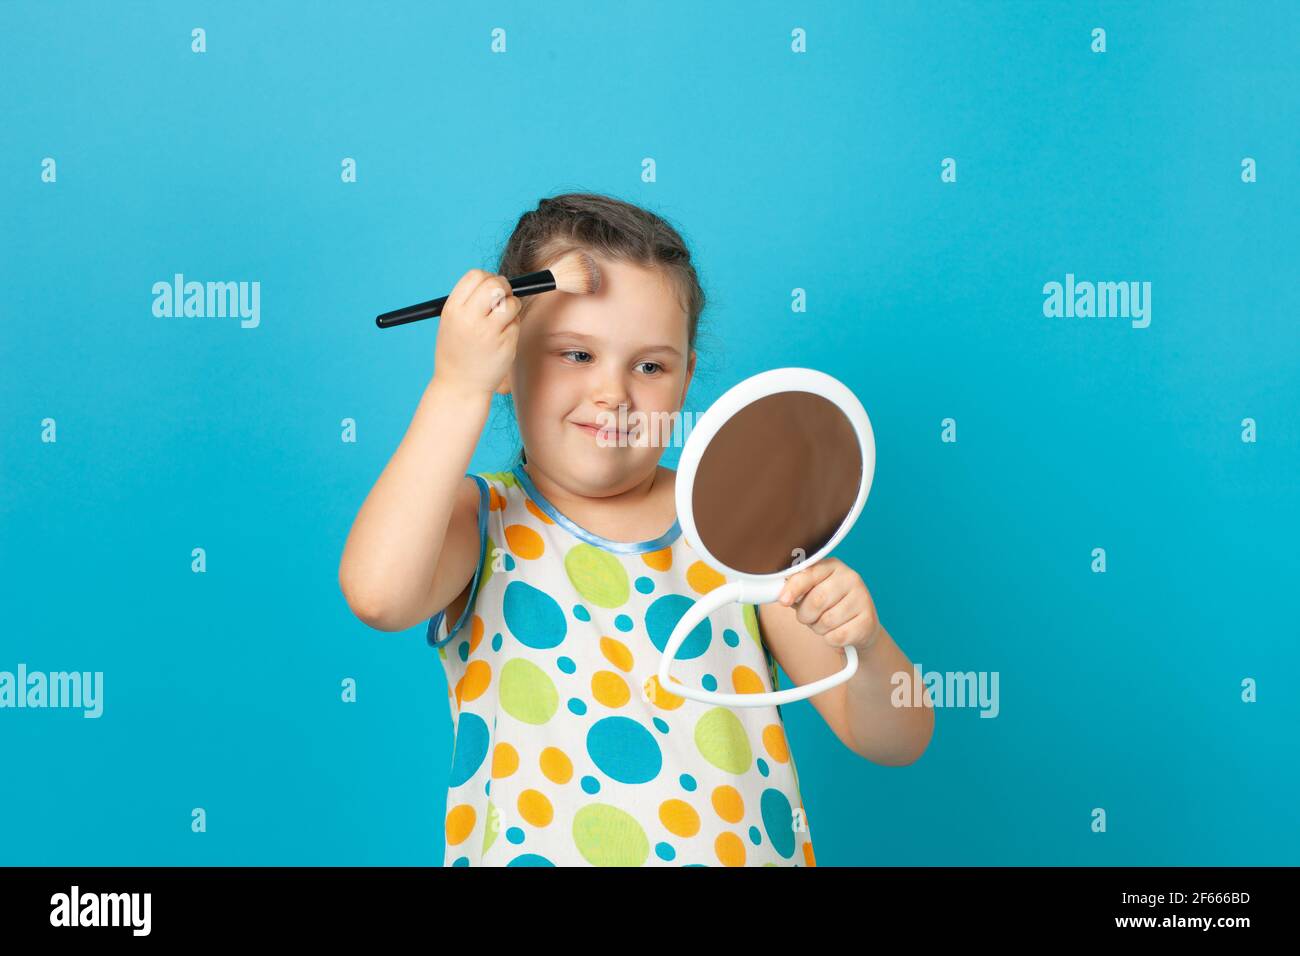 portrait of a girl in a white summer dress powdering her forehead with a large brush and doing blogger makeup, isolated on a blue background Stock Photo